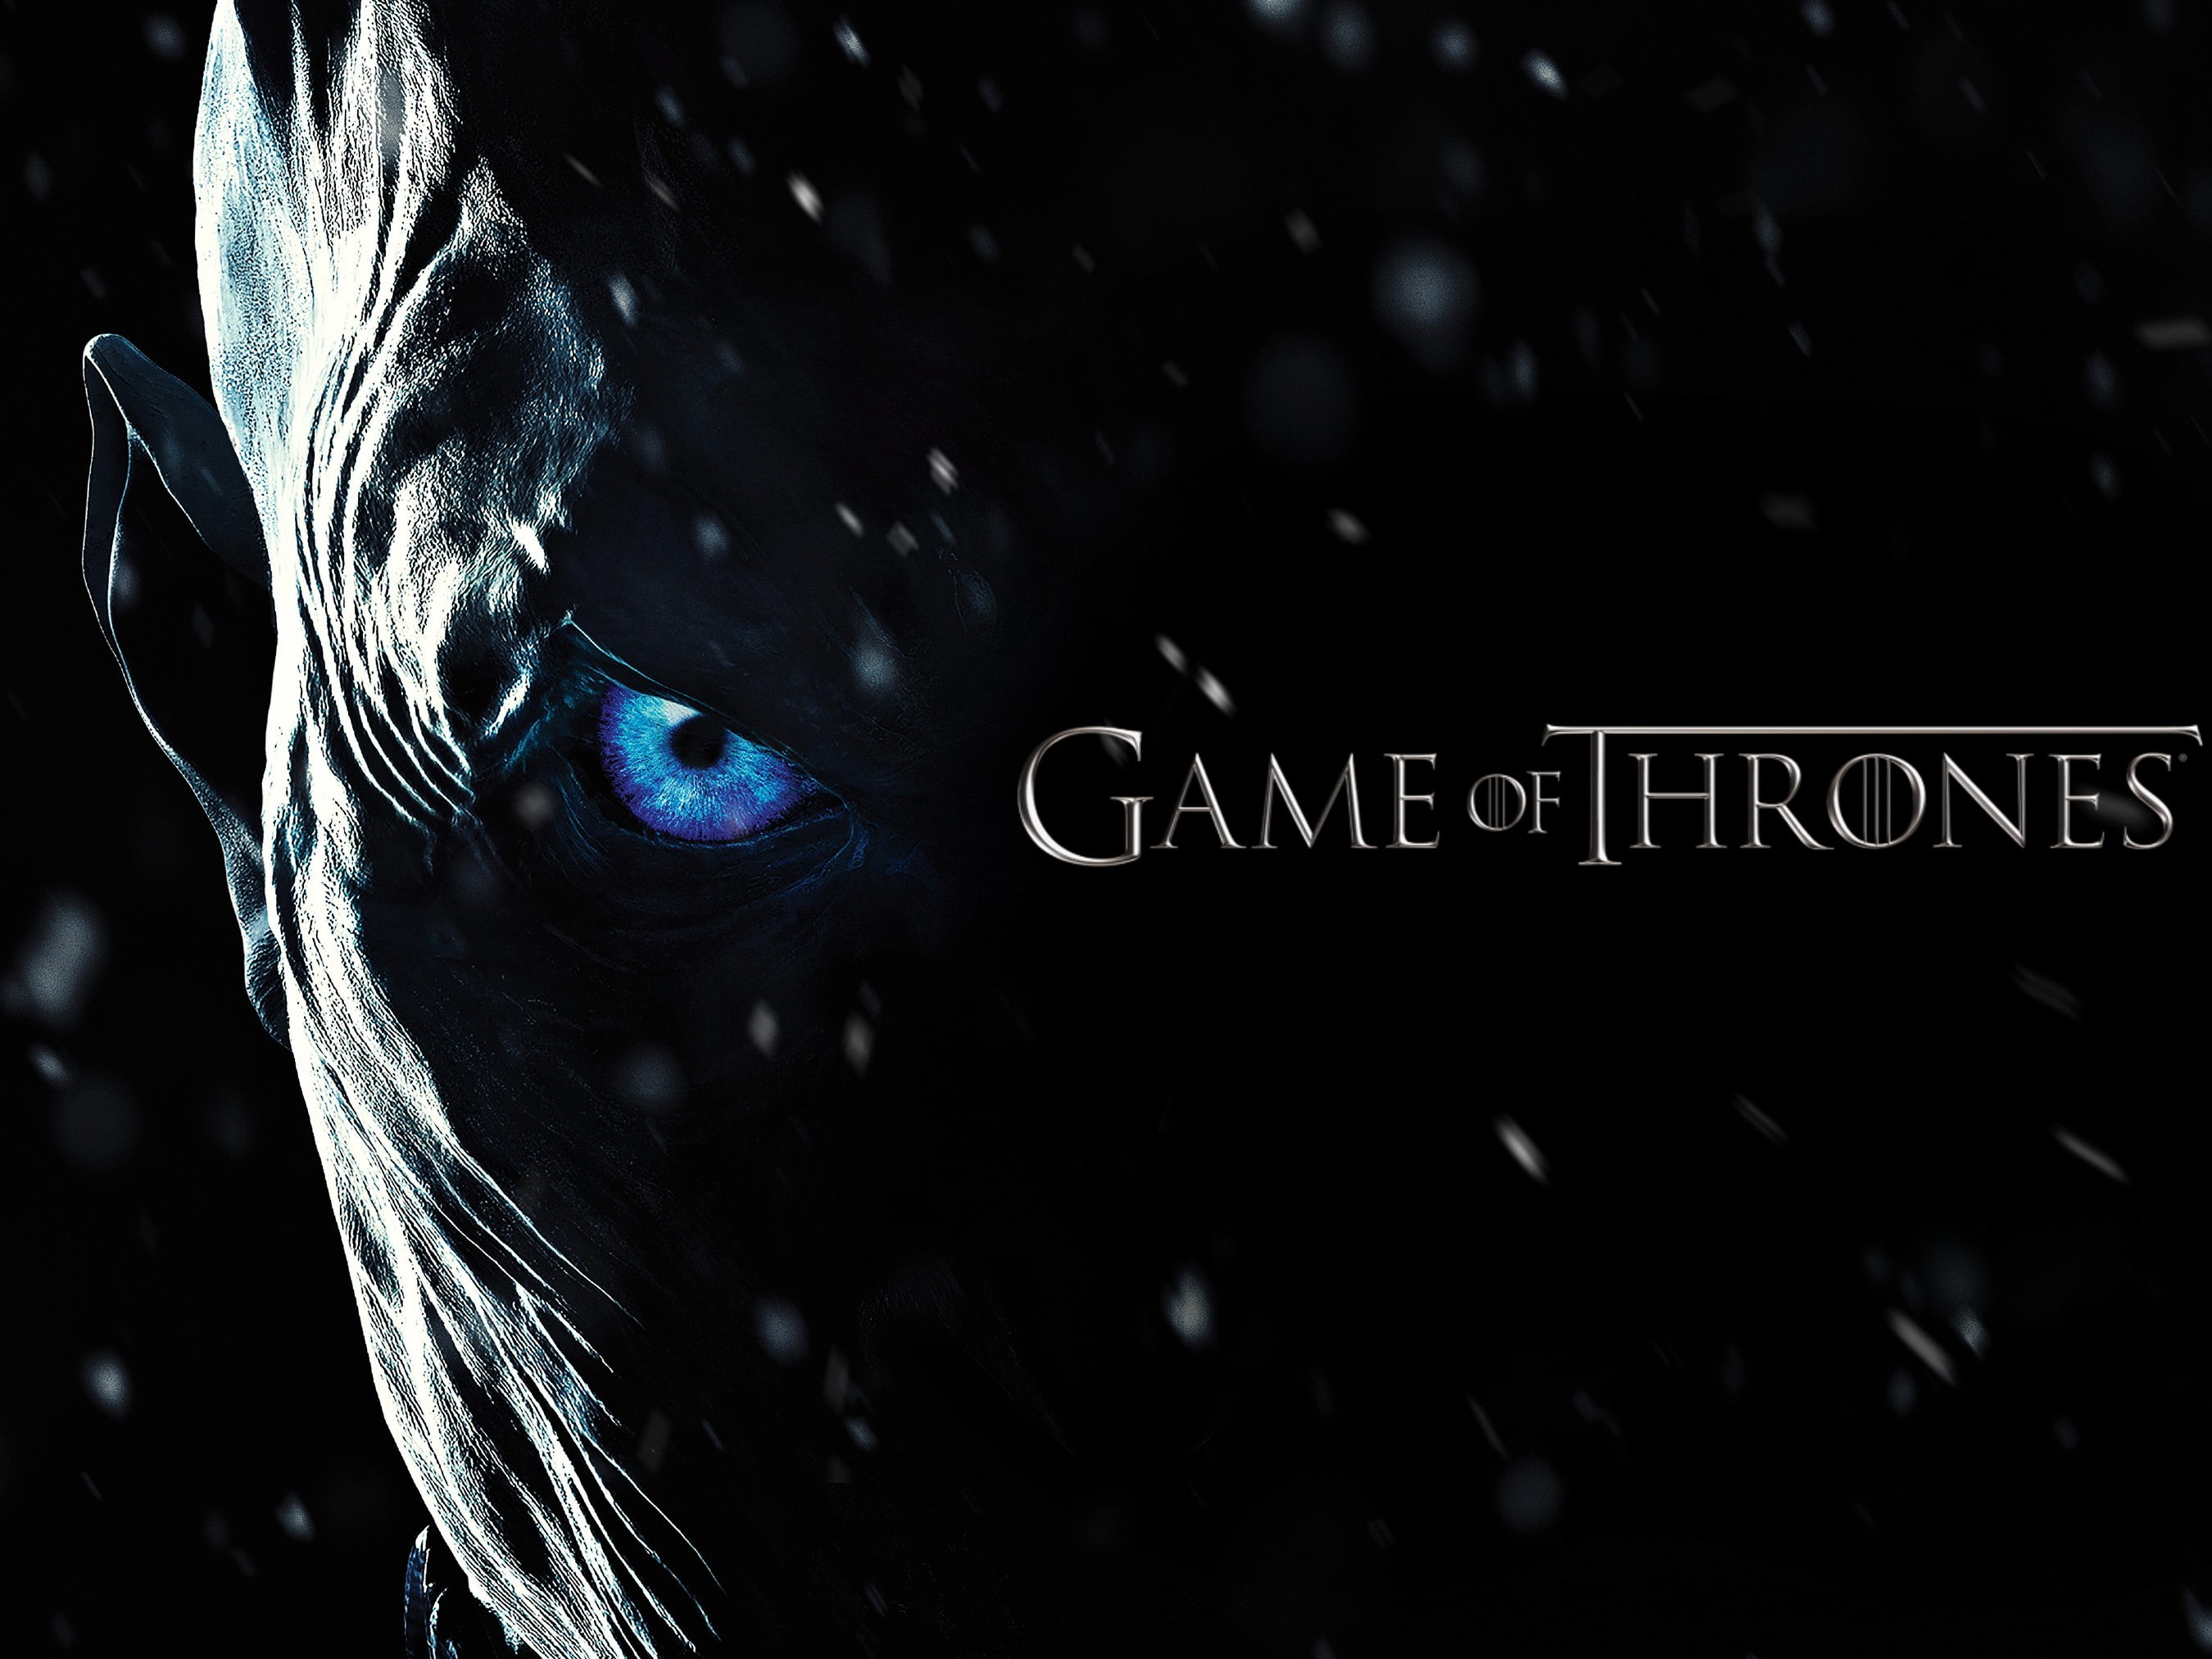 blue eyes, Game Of Thrones, The Night King